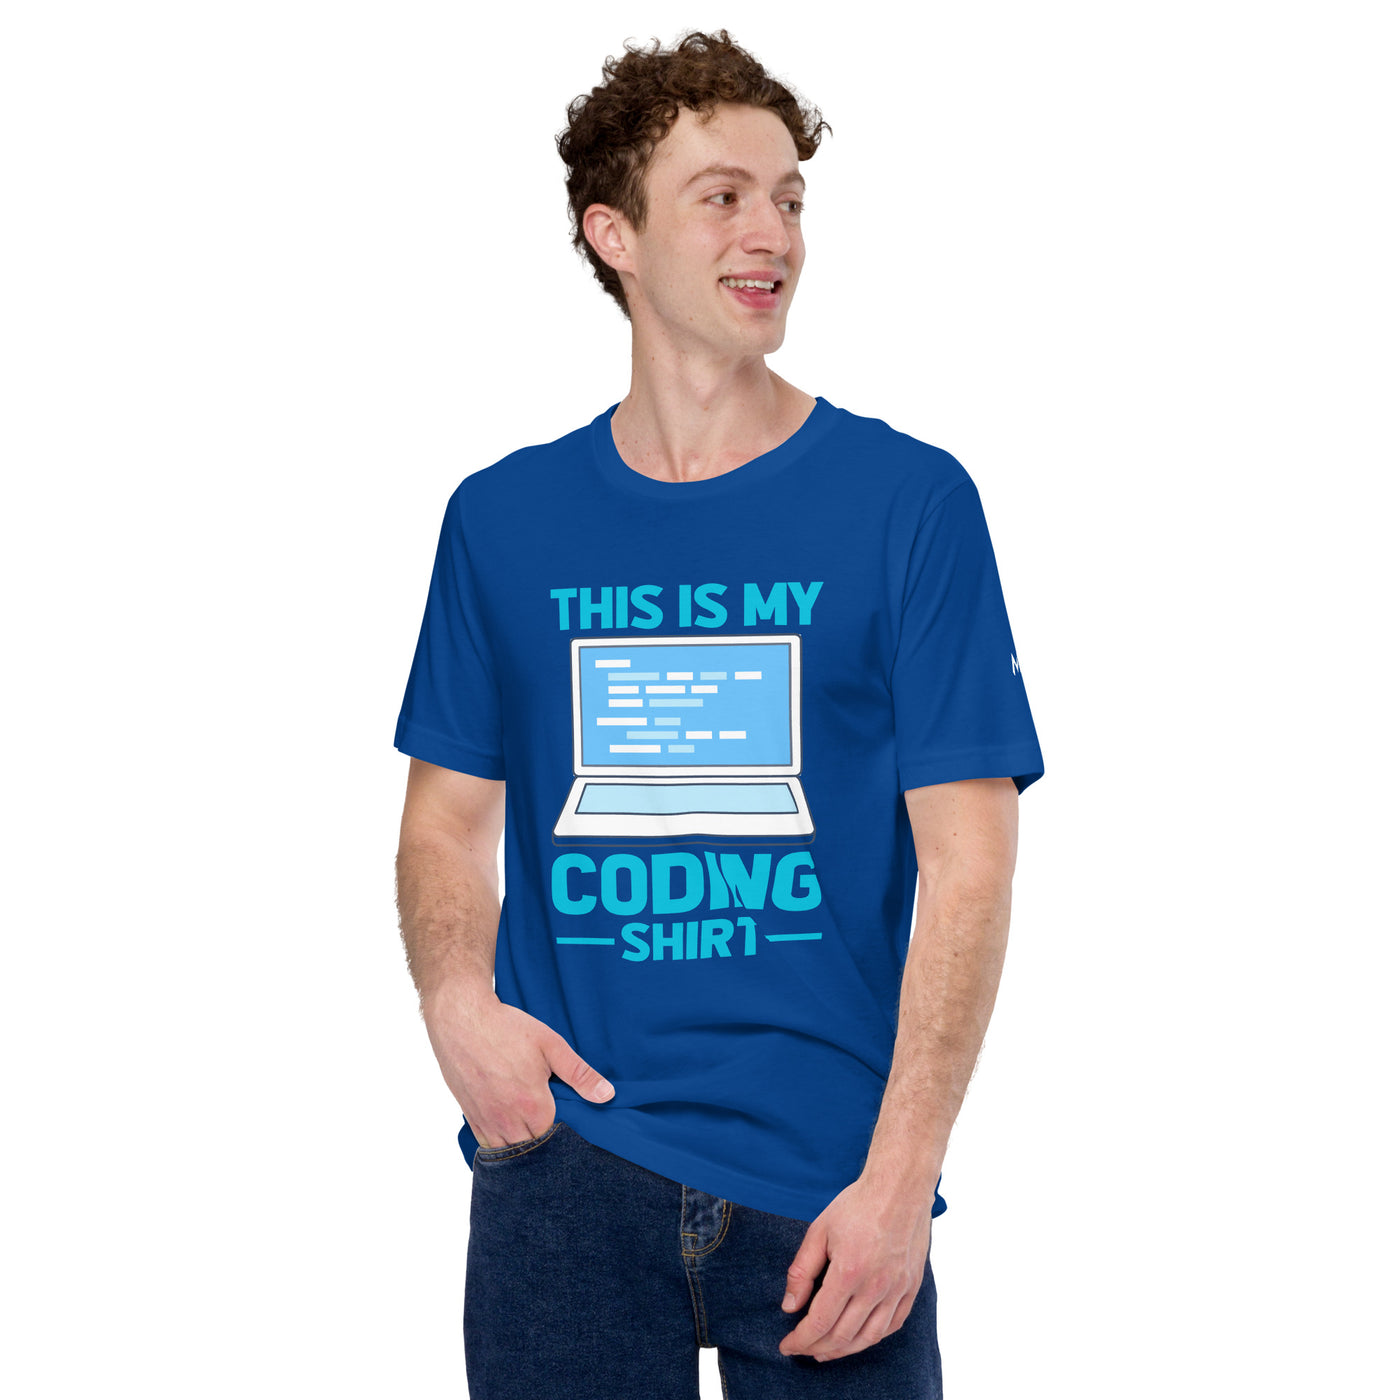 This is my coding shirt - Unisex t-shirt